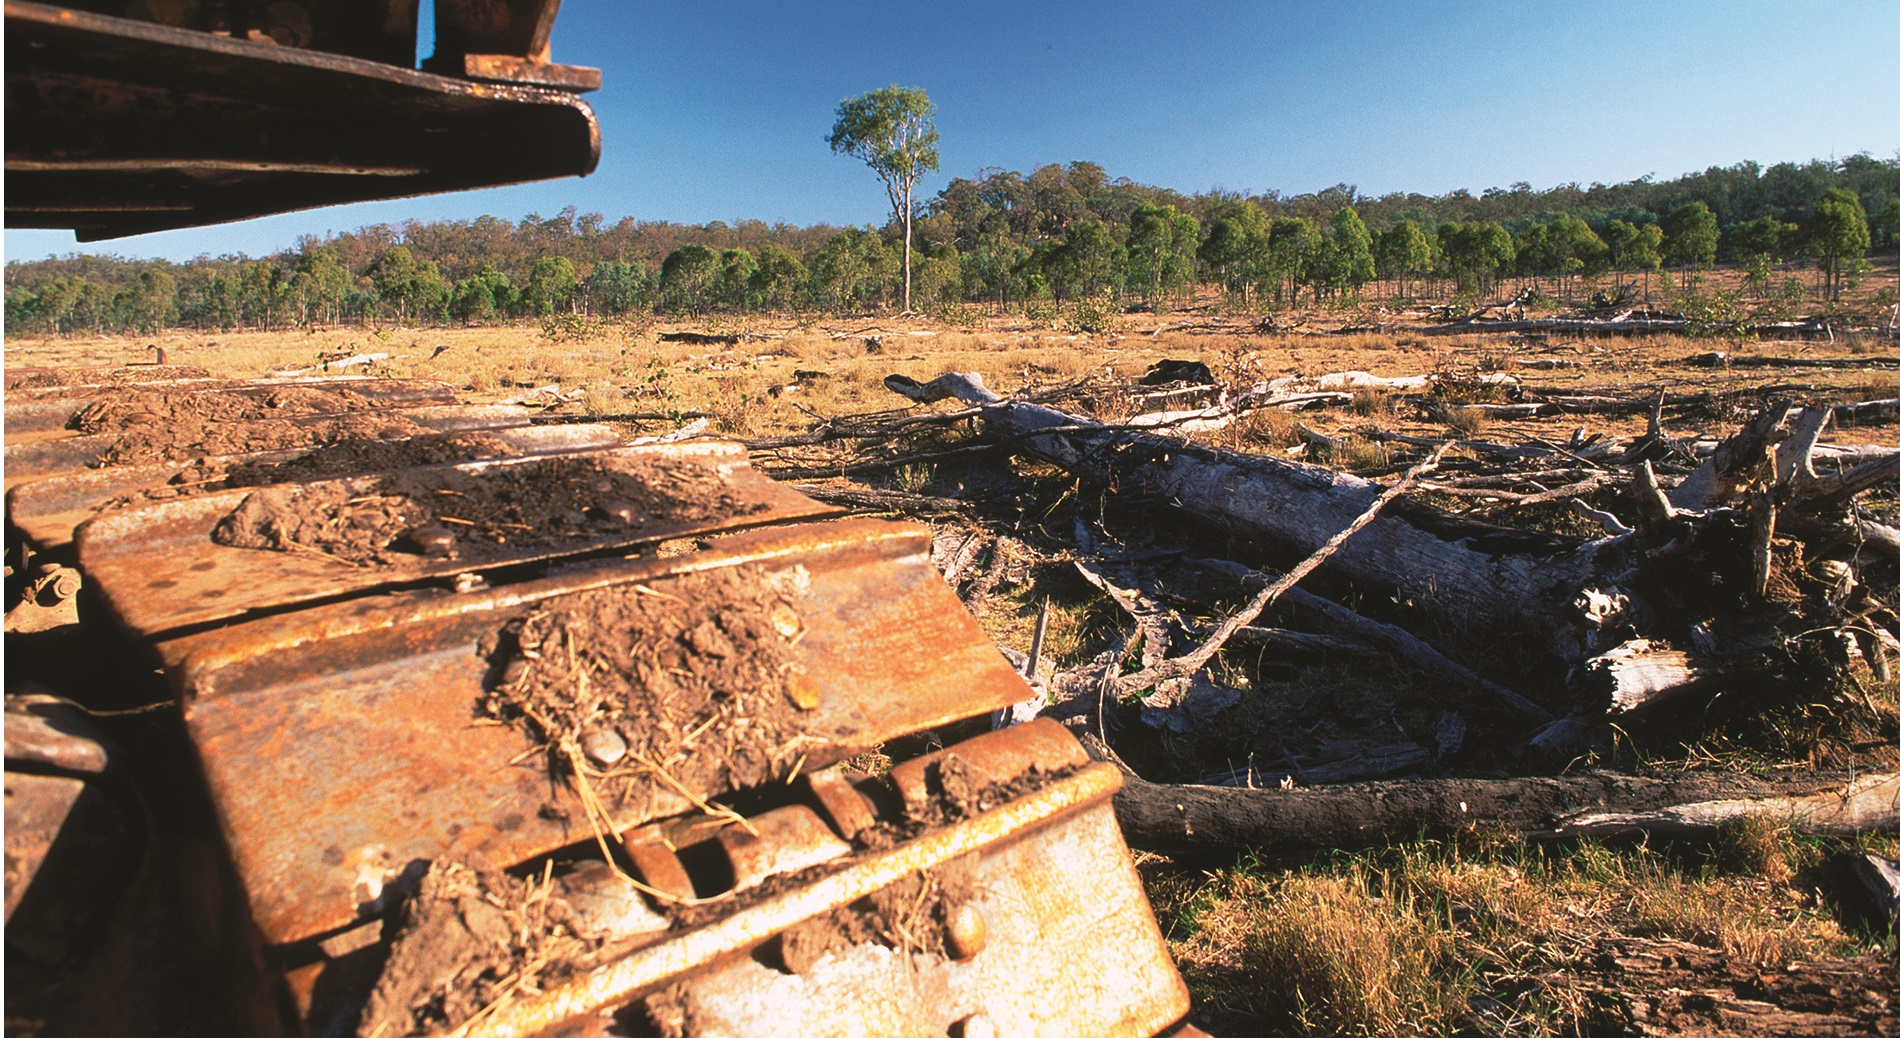 Find out what is driving deforestation in Queensland